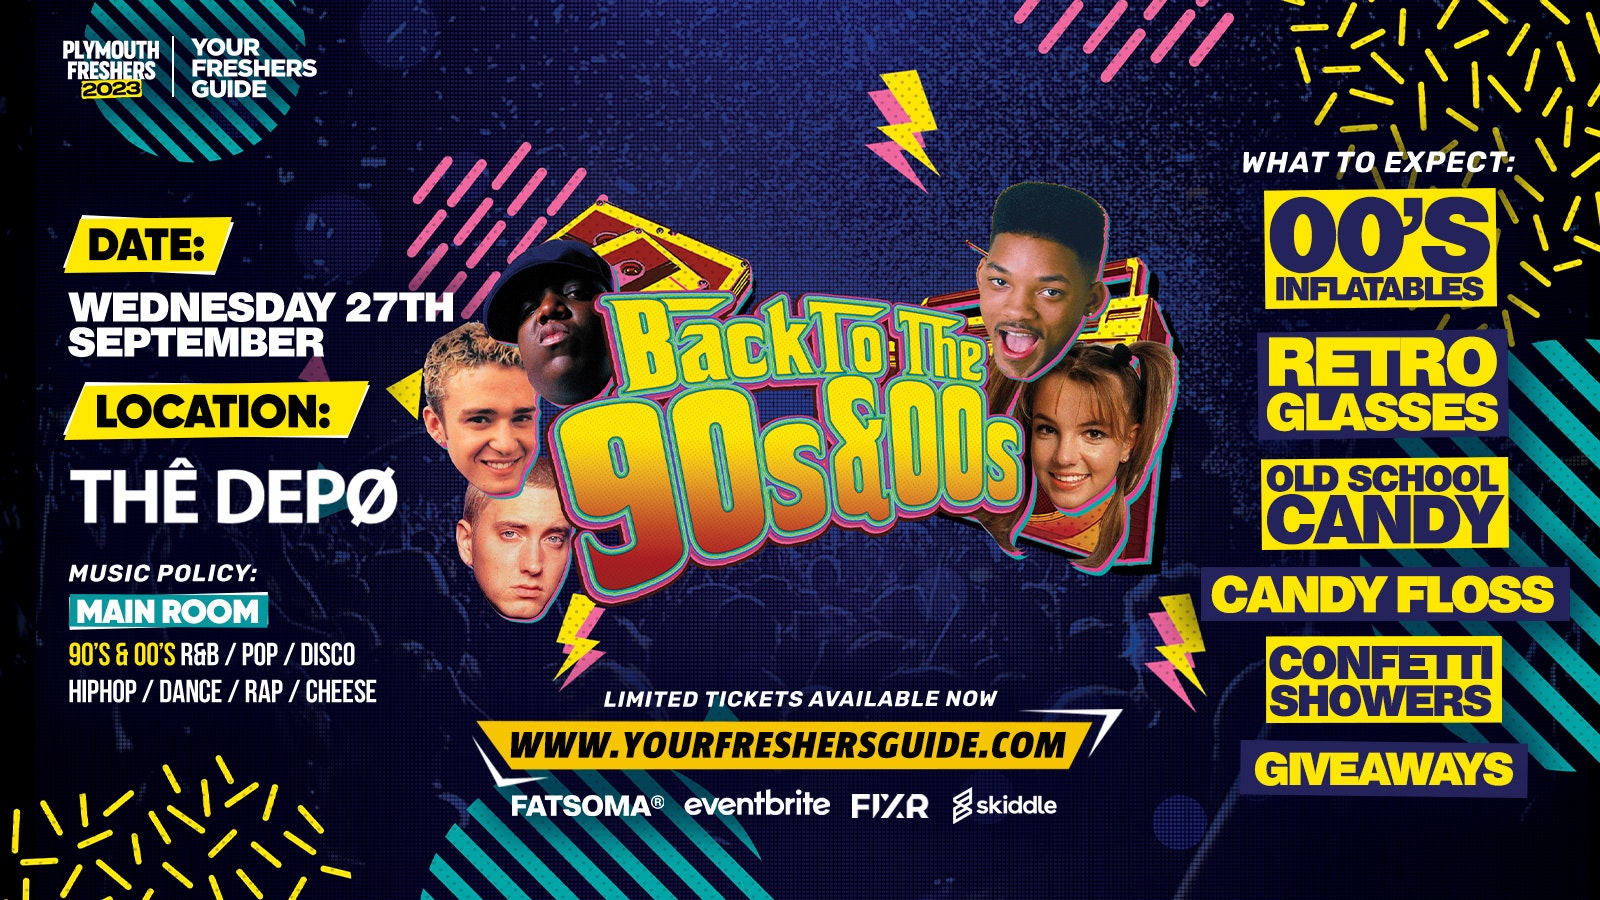 Back to the 90s & 00s – Free Entry B4 11:30pm! | Plymouth Freshers 2023